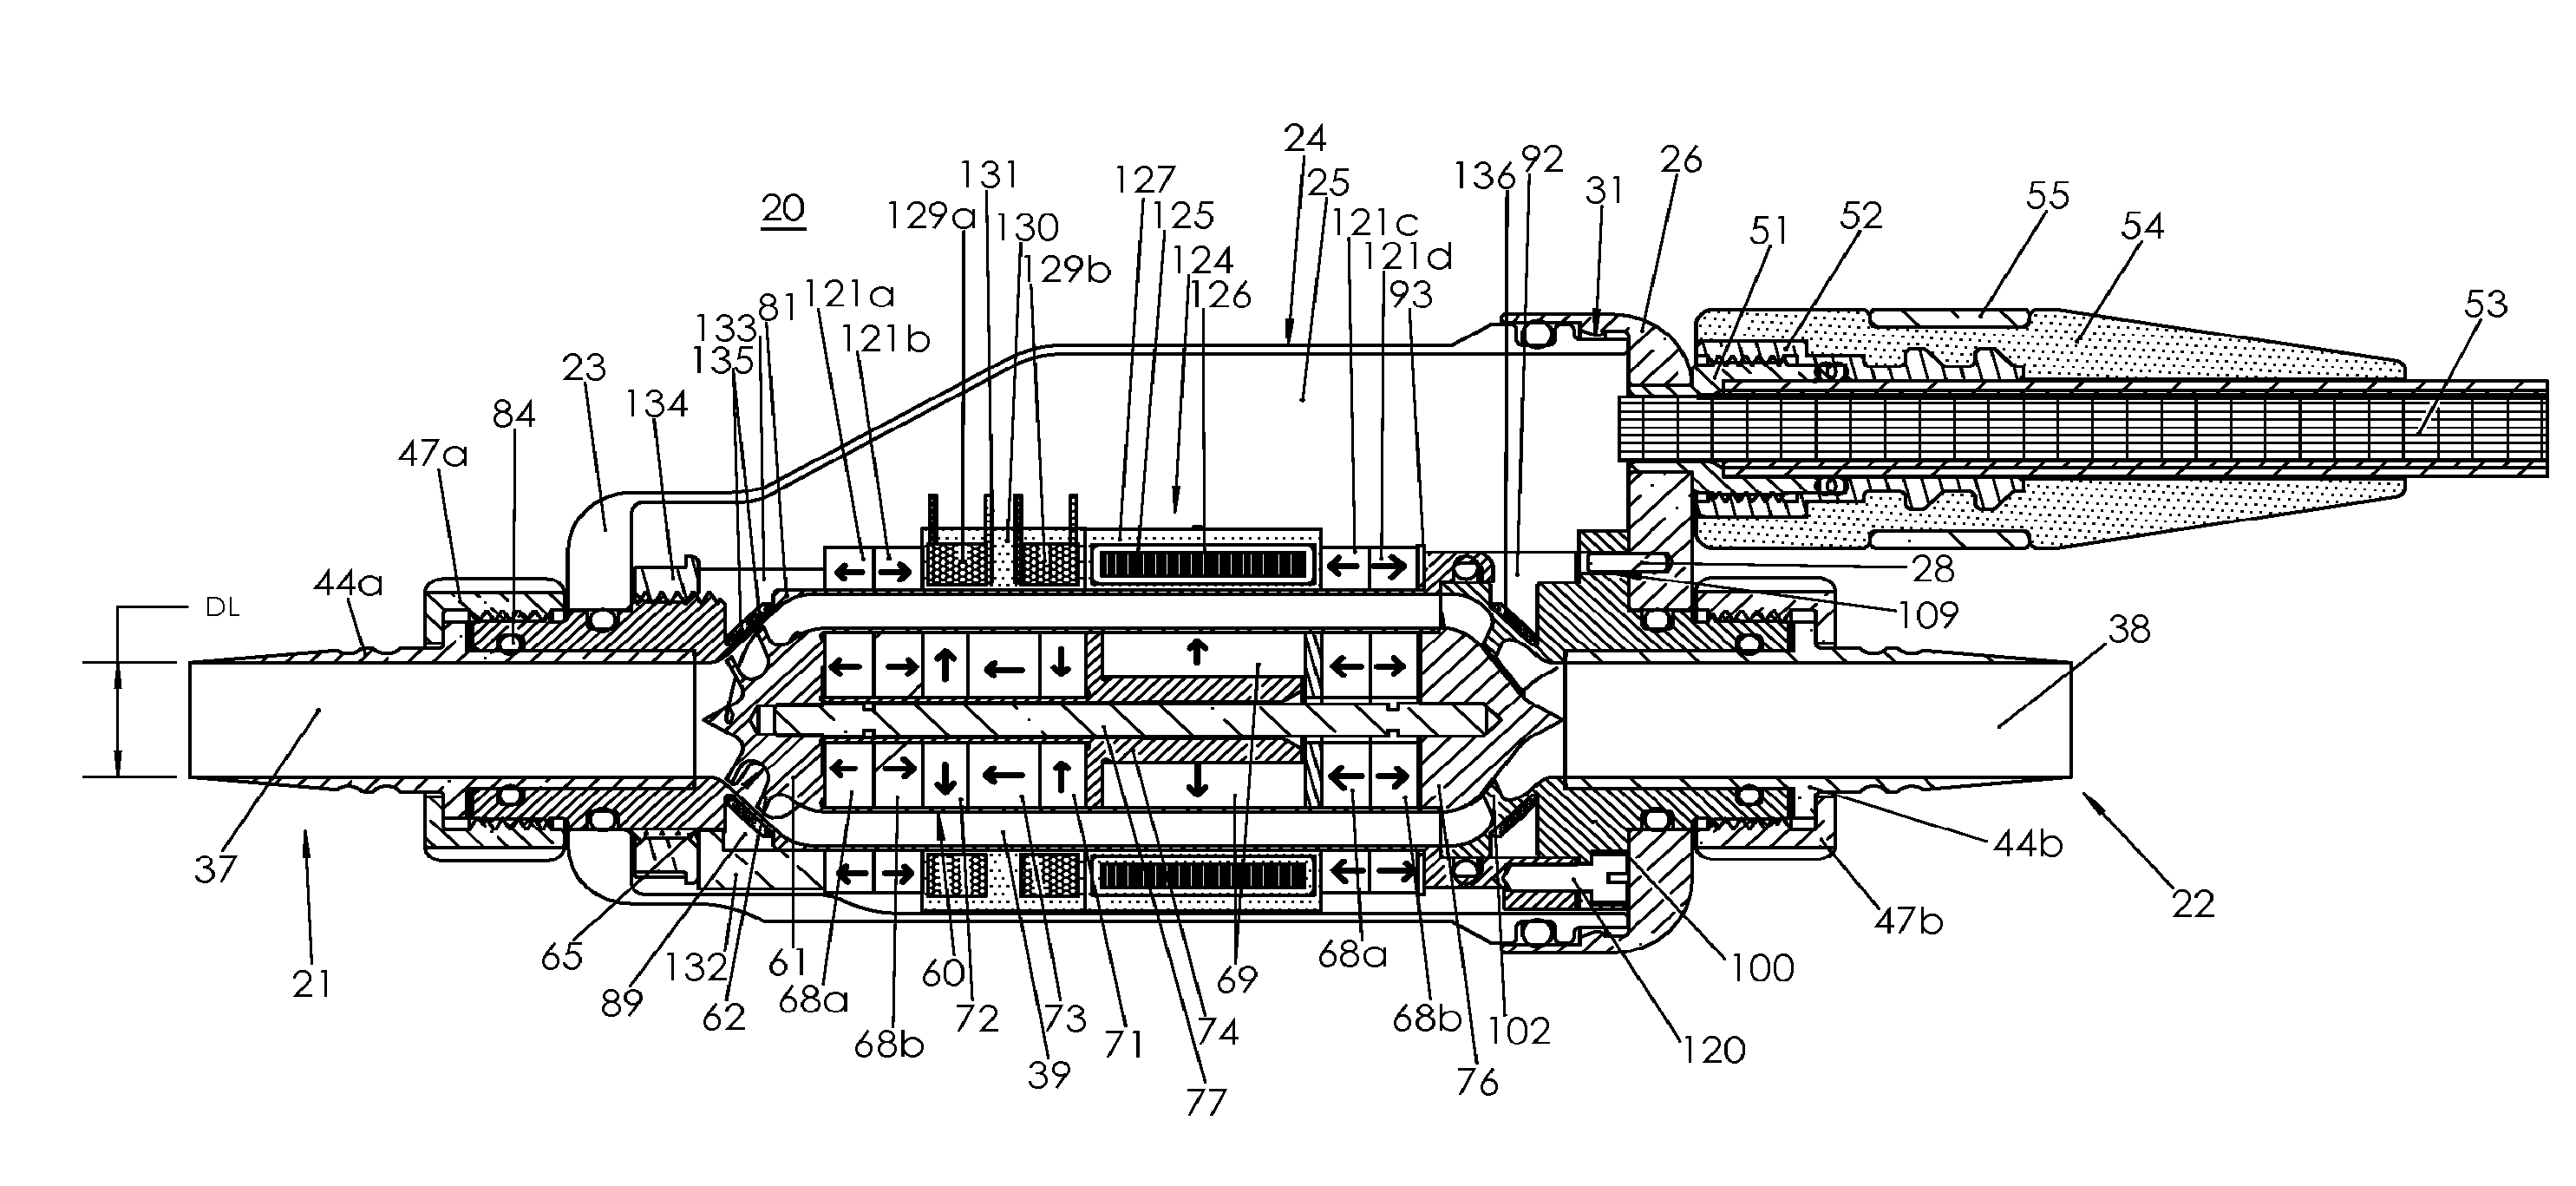 Magnetically-levitated blood pump with optimization method enabling miniaturization